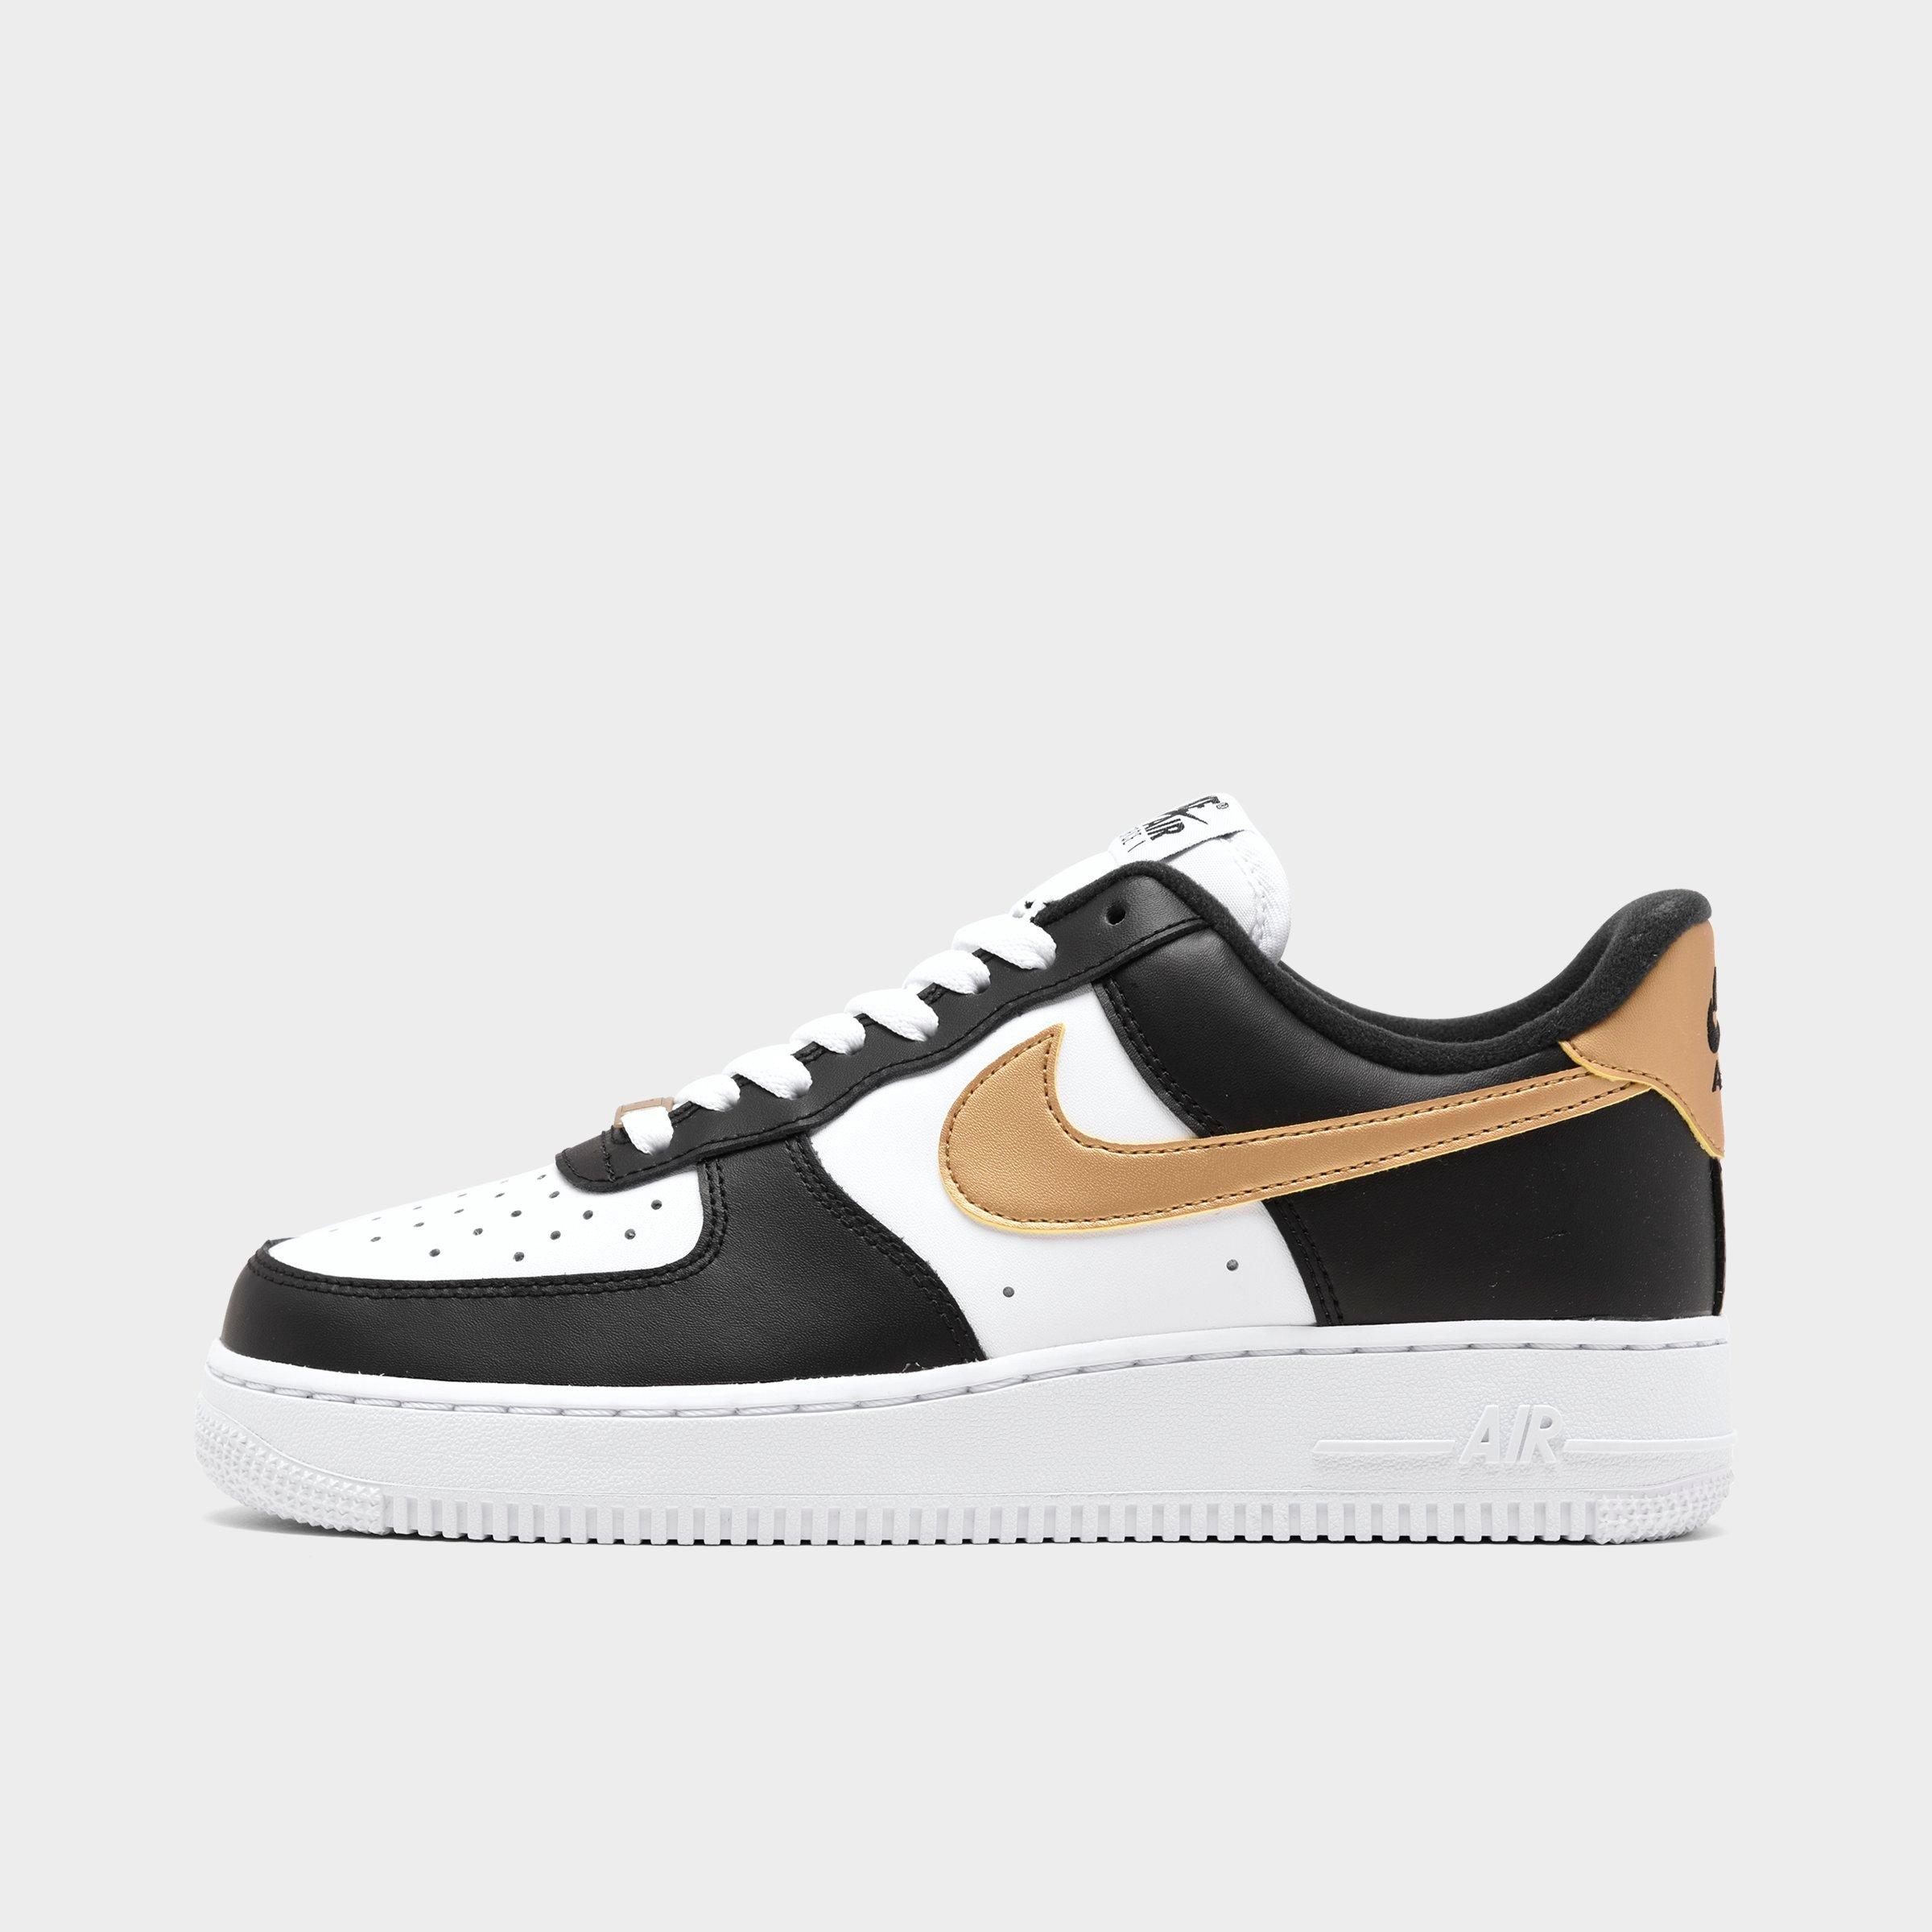 air force 1 at finish line